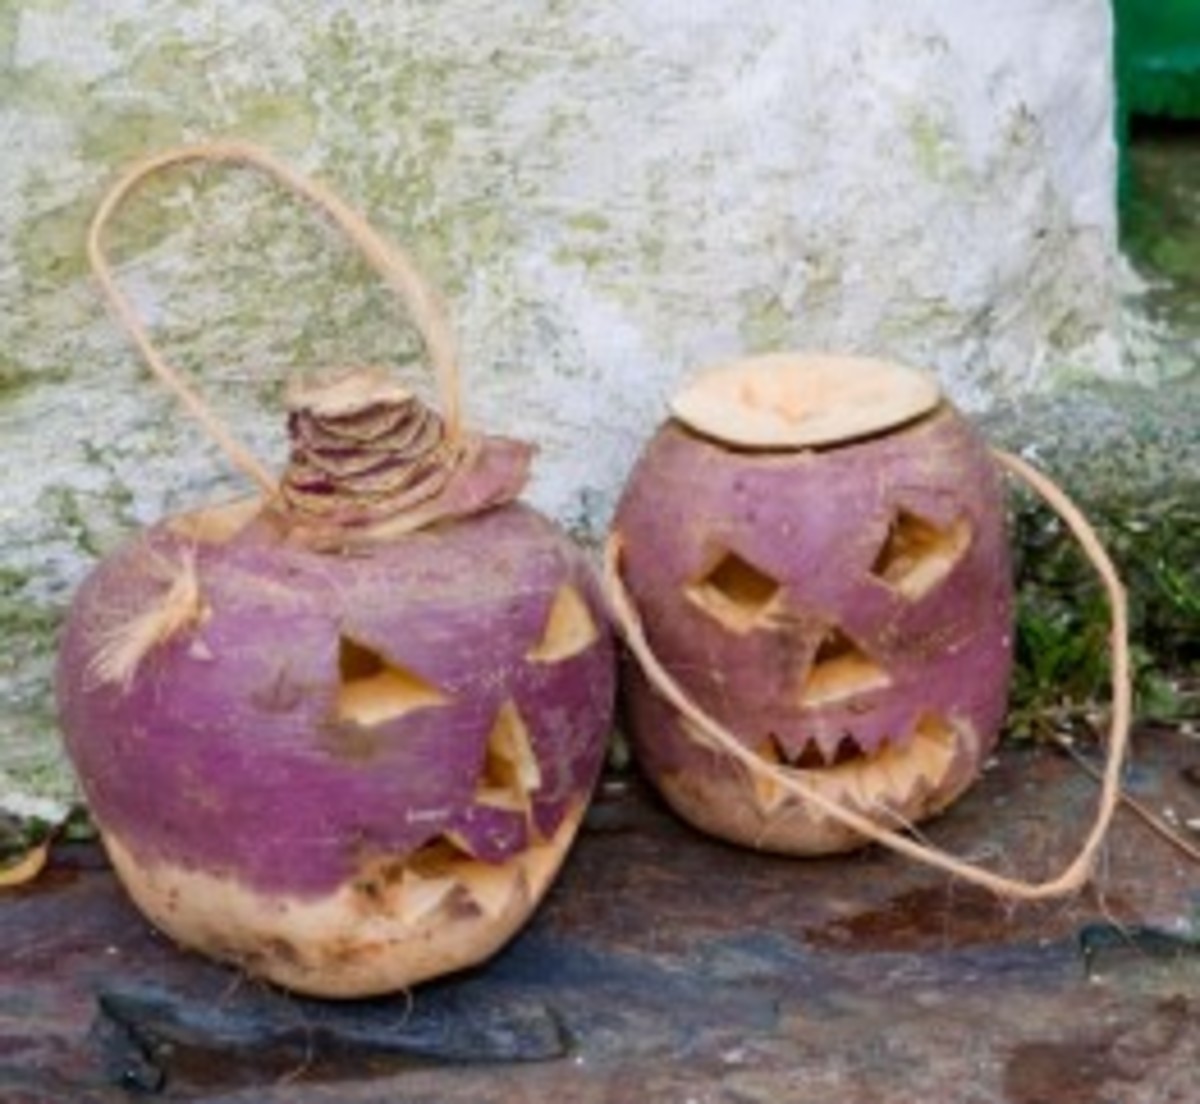 The Pagan Roots of Halloween